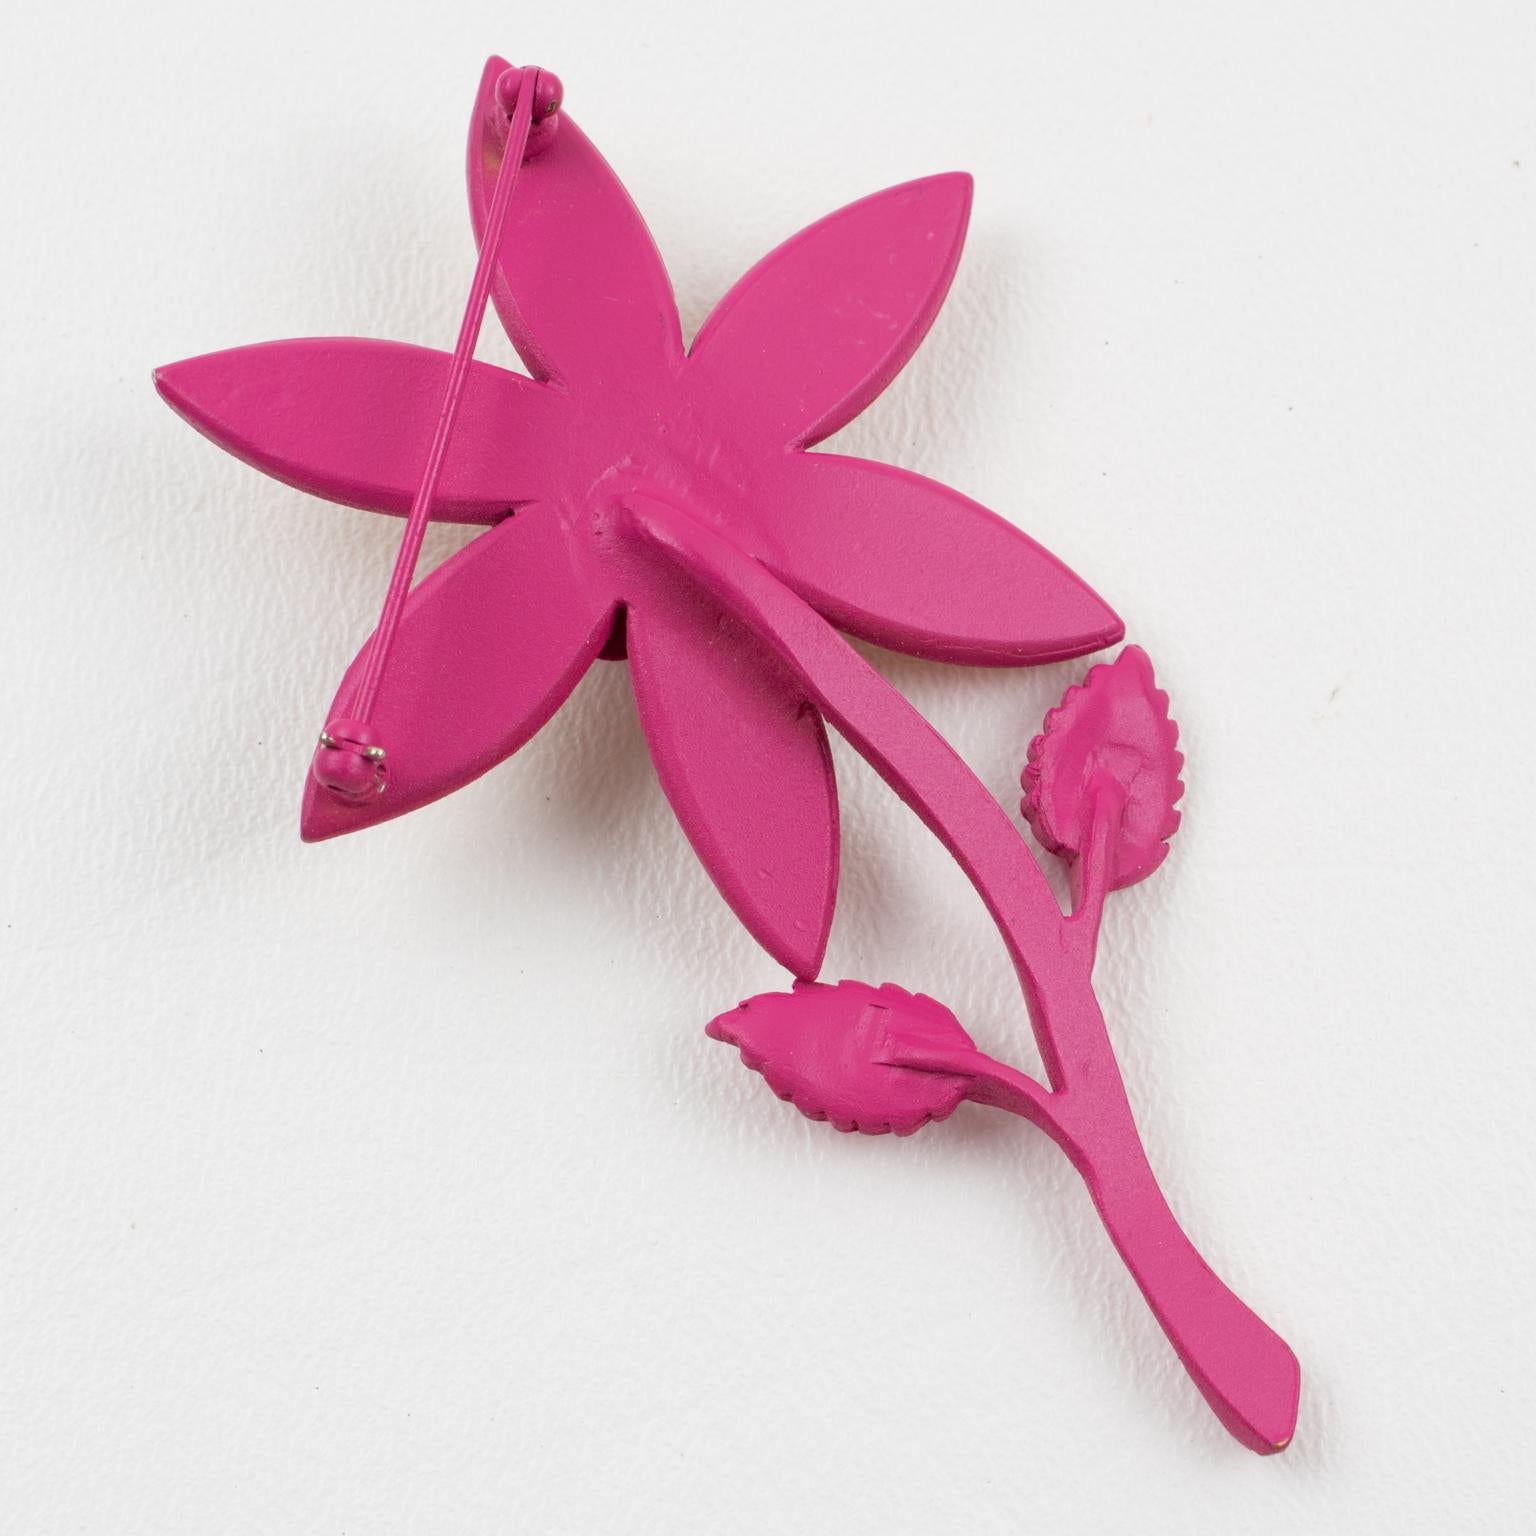 John Galliano Pink Enamel and Straw Daisy Flower Pin Brooch In Excellent Condition For Sale In Atlanta, GA